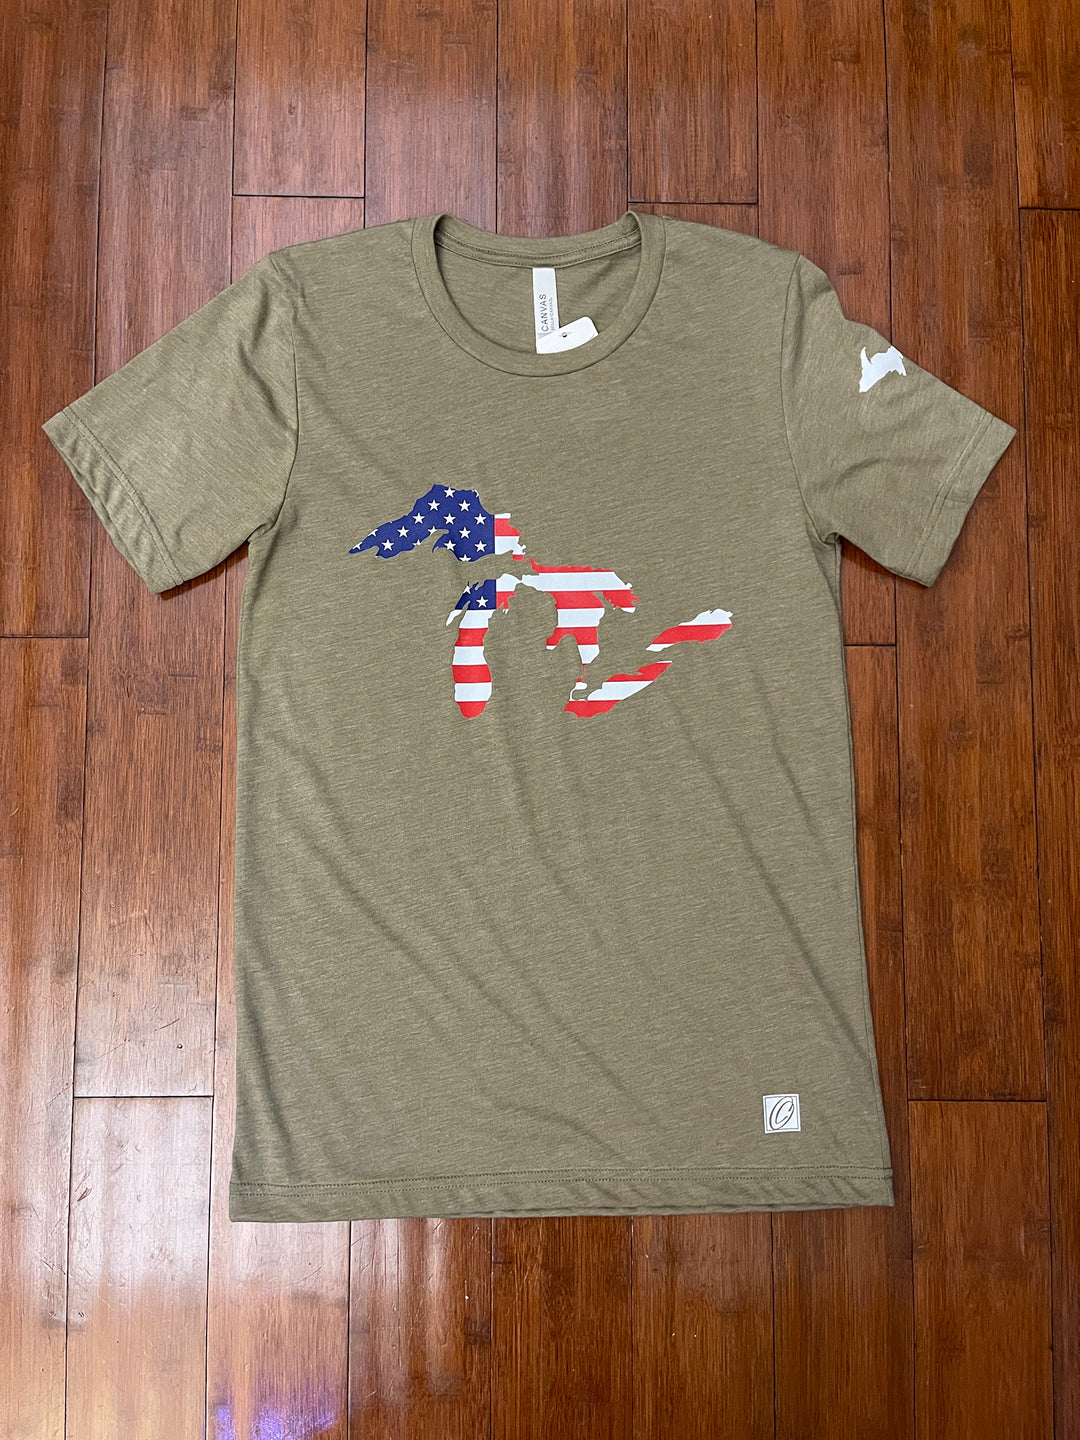 Adult S Bella Canvas Triblend Crewneck Short Sleeve Tee - Great Lakes Silhouette - Stars & Stripes